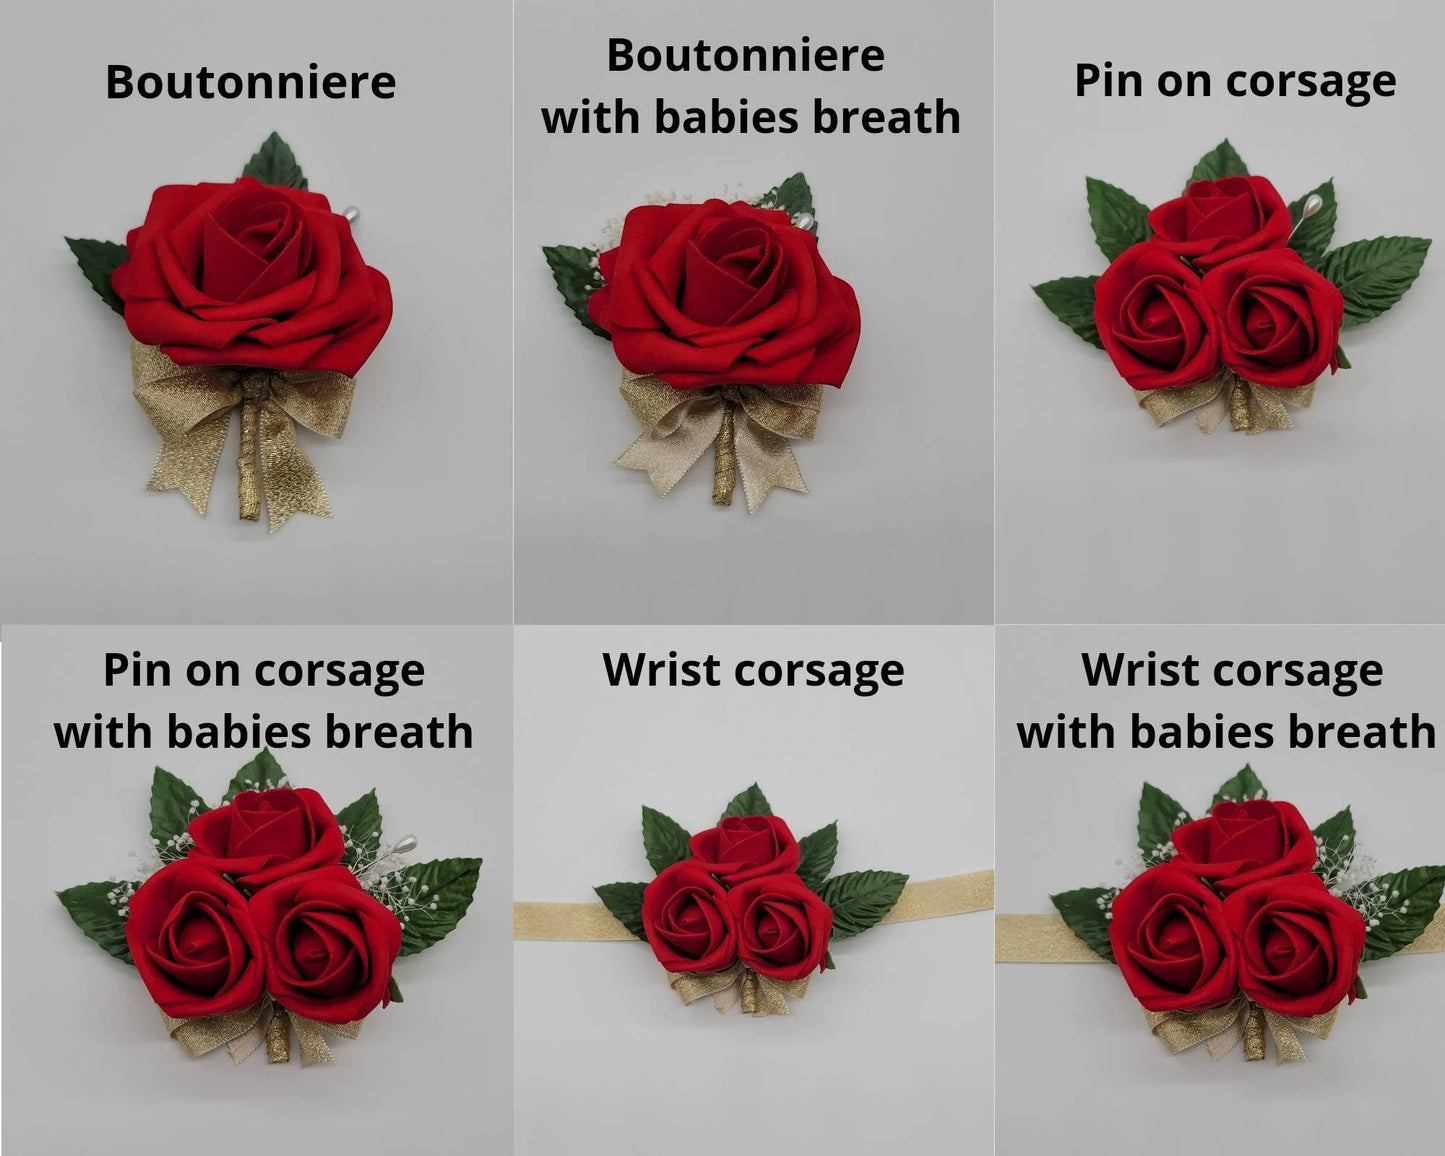 Dusty Rose, Black, and Ivory Boutonnieres and Corsages